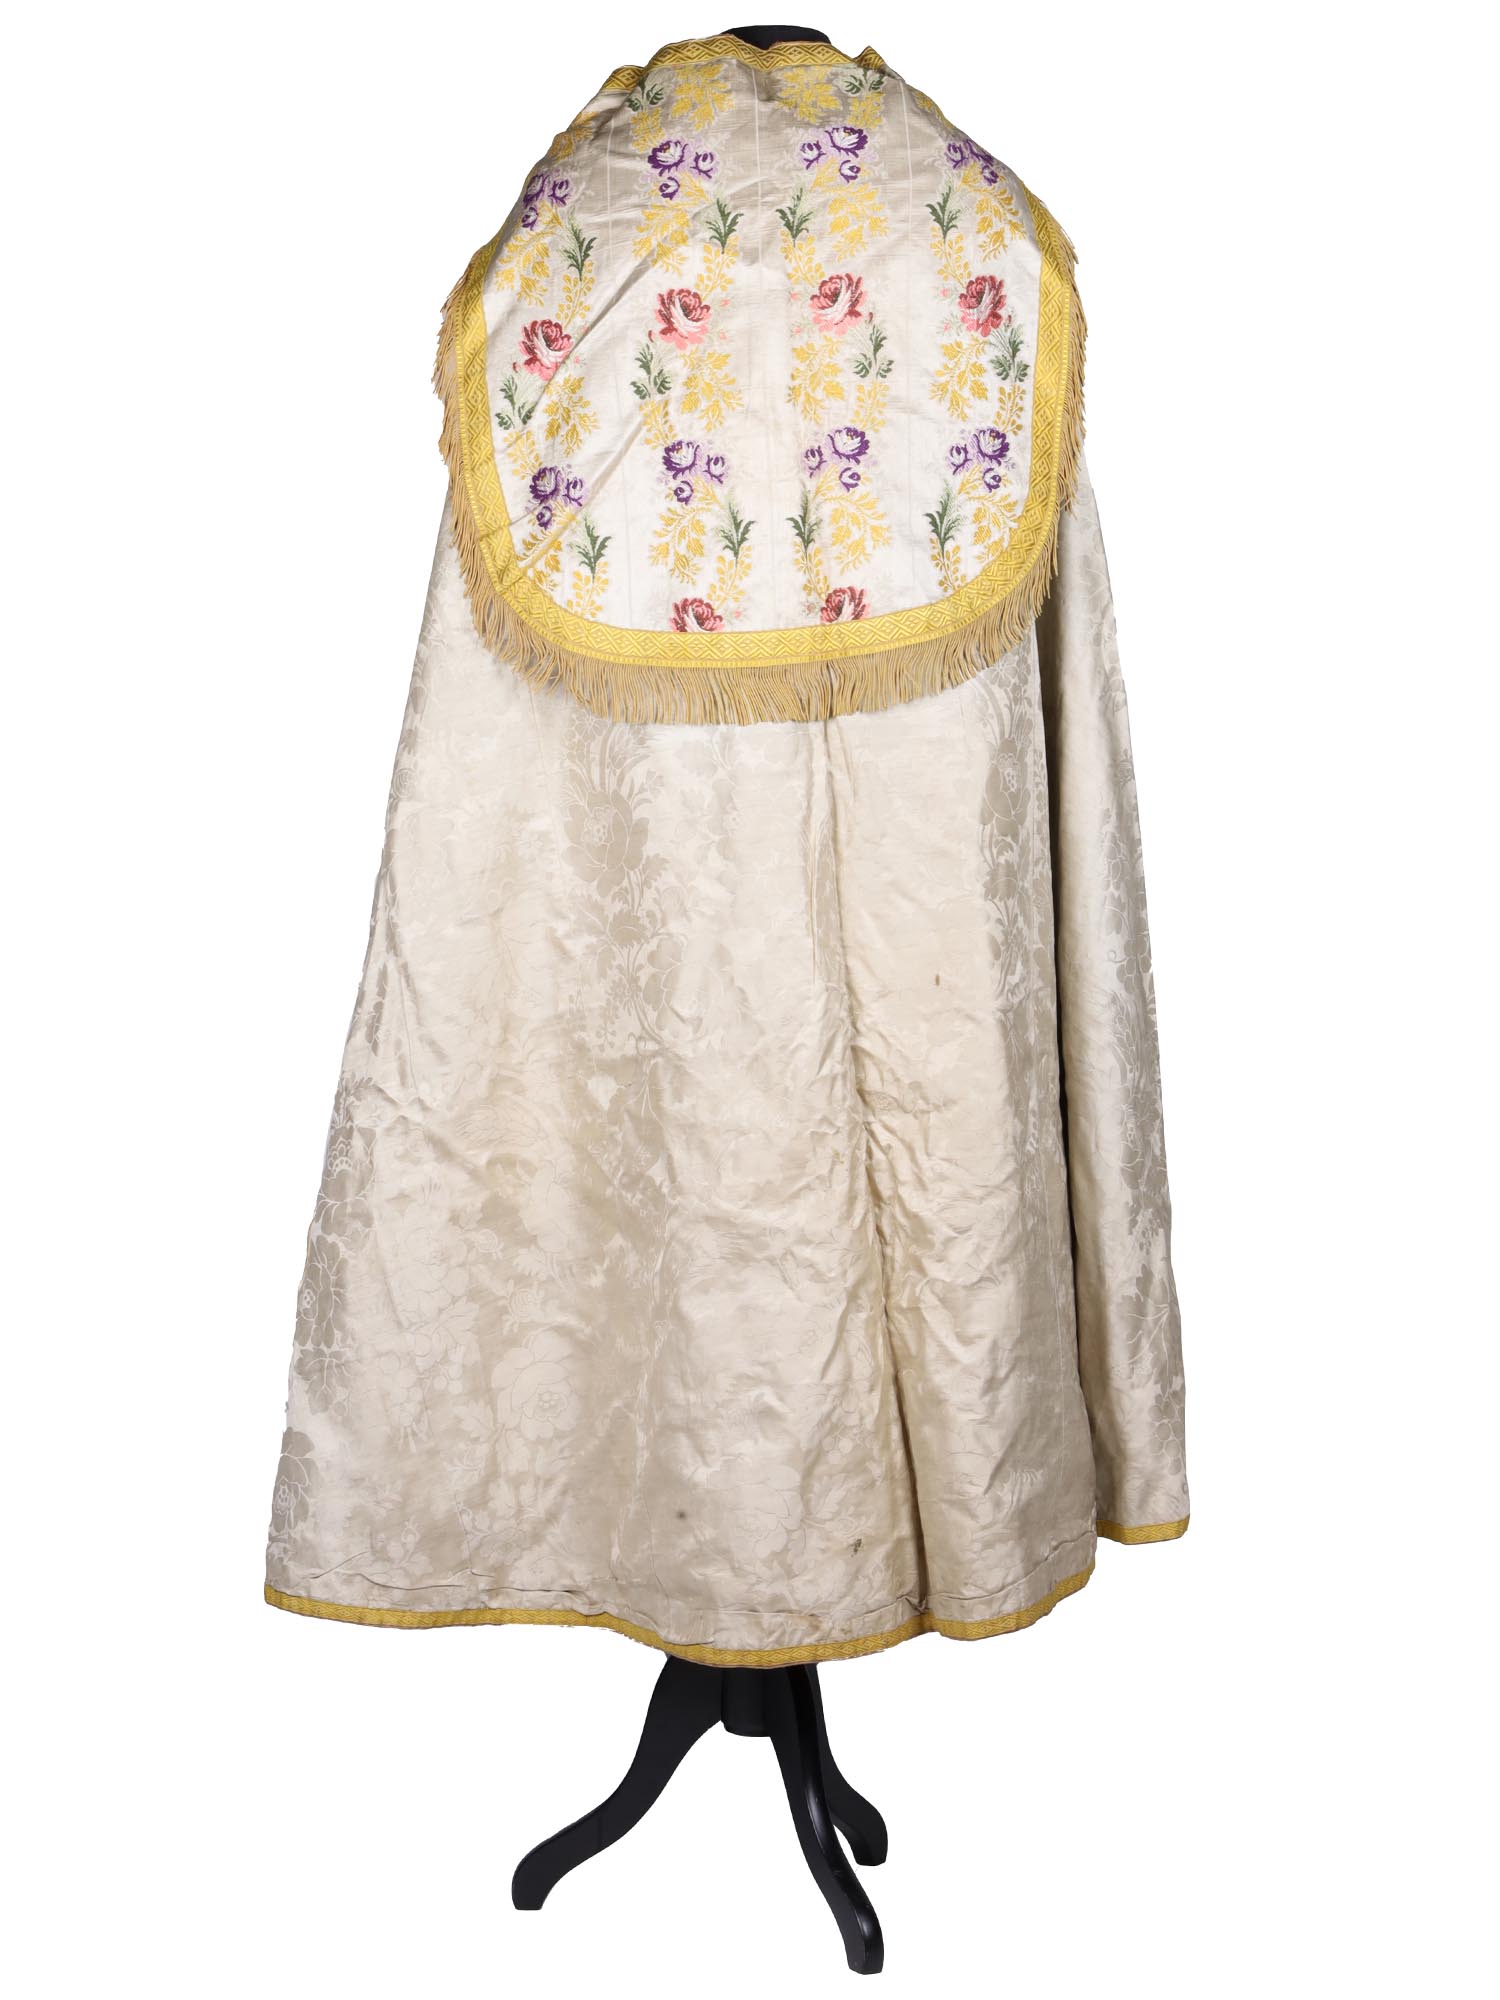 ANTIQUE EMBROIDERED CAPE CHASUBLE PRIEST CLOTHES PIC-3